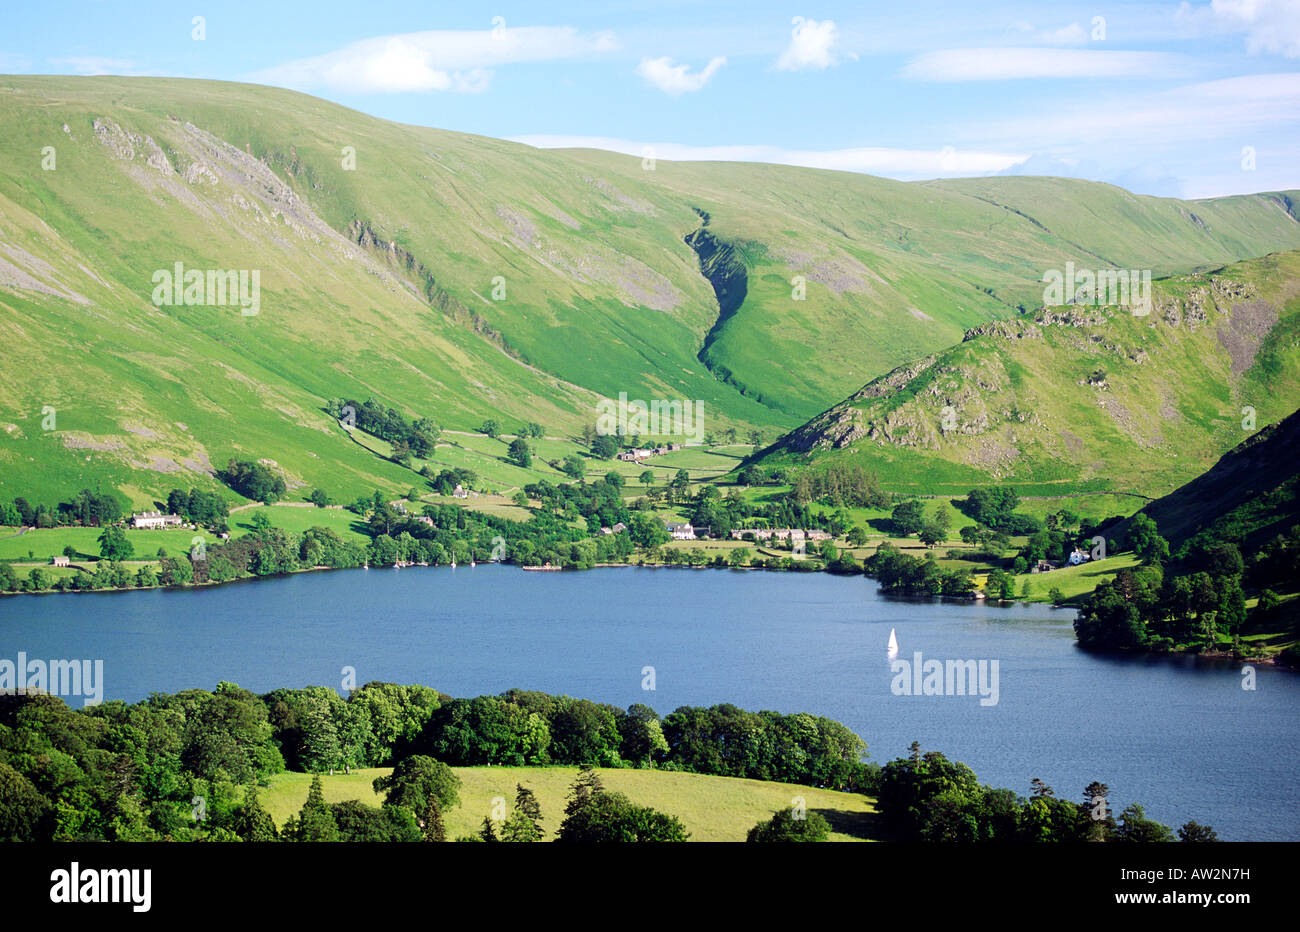 Ullswater in the Lake District National Park, Cumbria, England. Looking SE toward Howtown, Swarth Fell and Martindale. Summer. Stock Photo